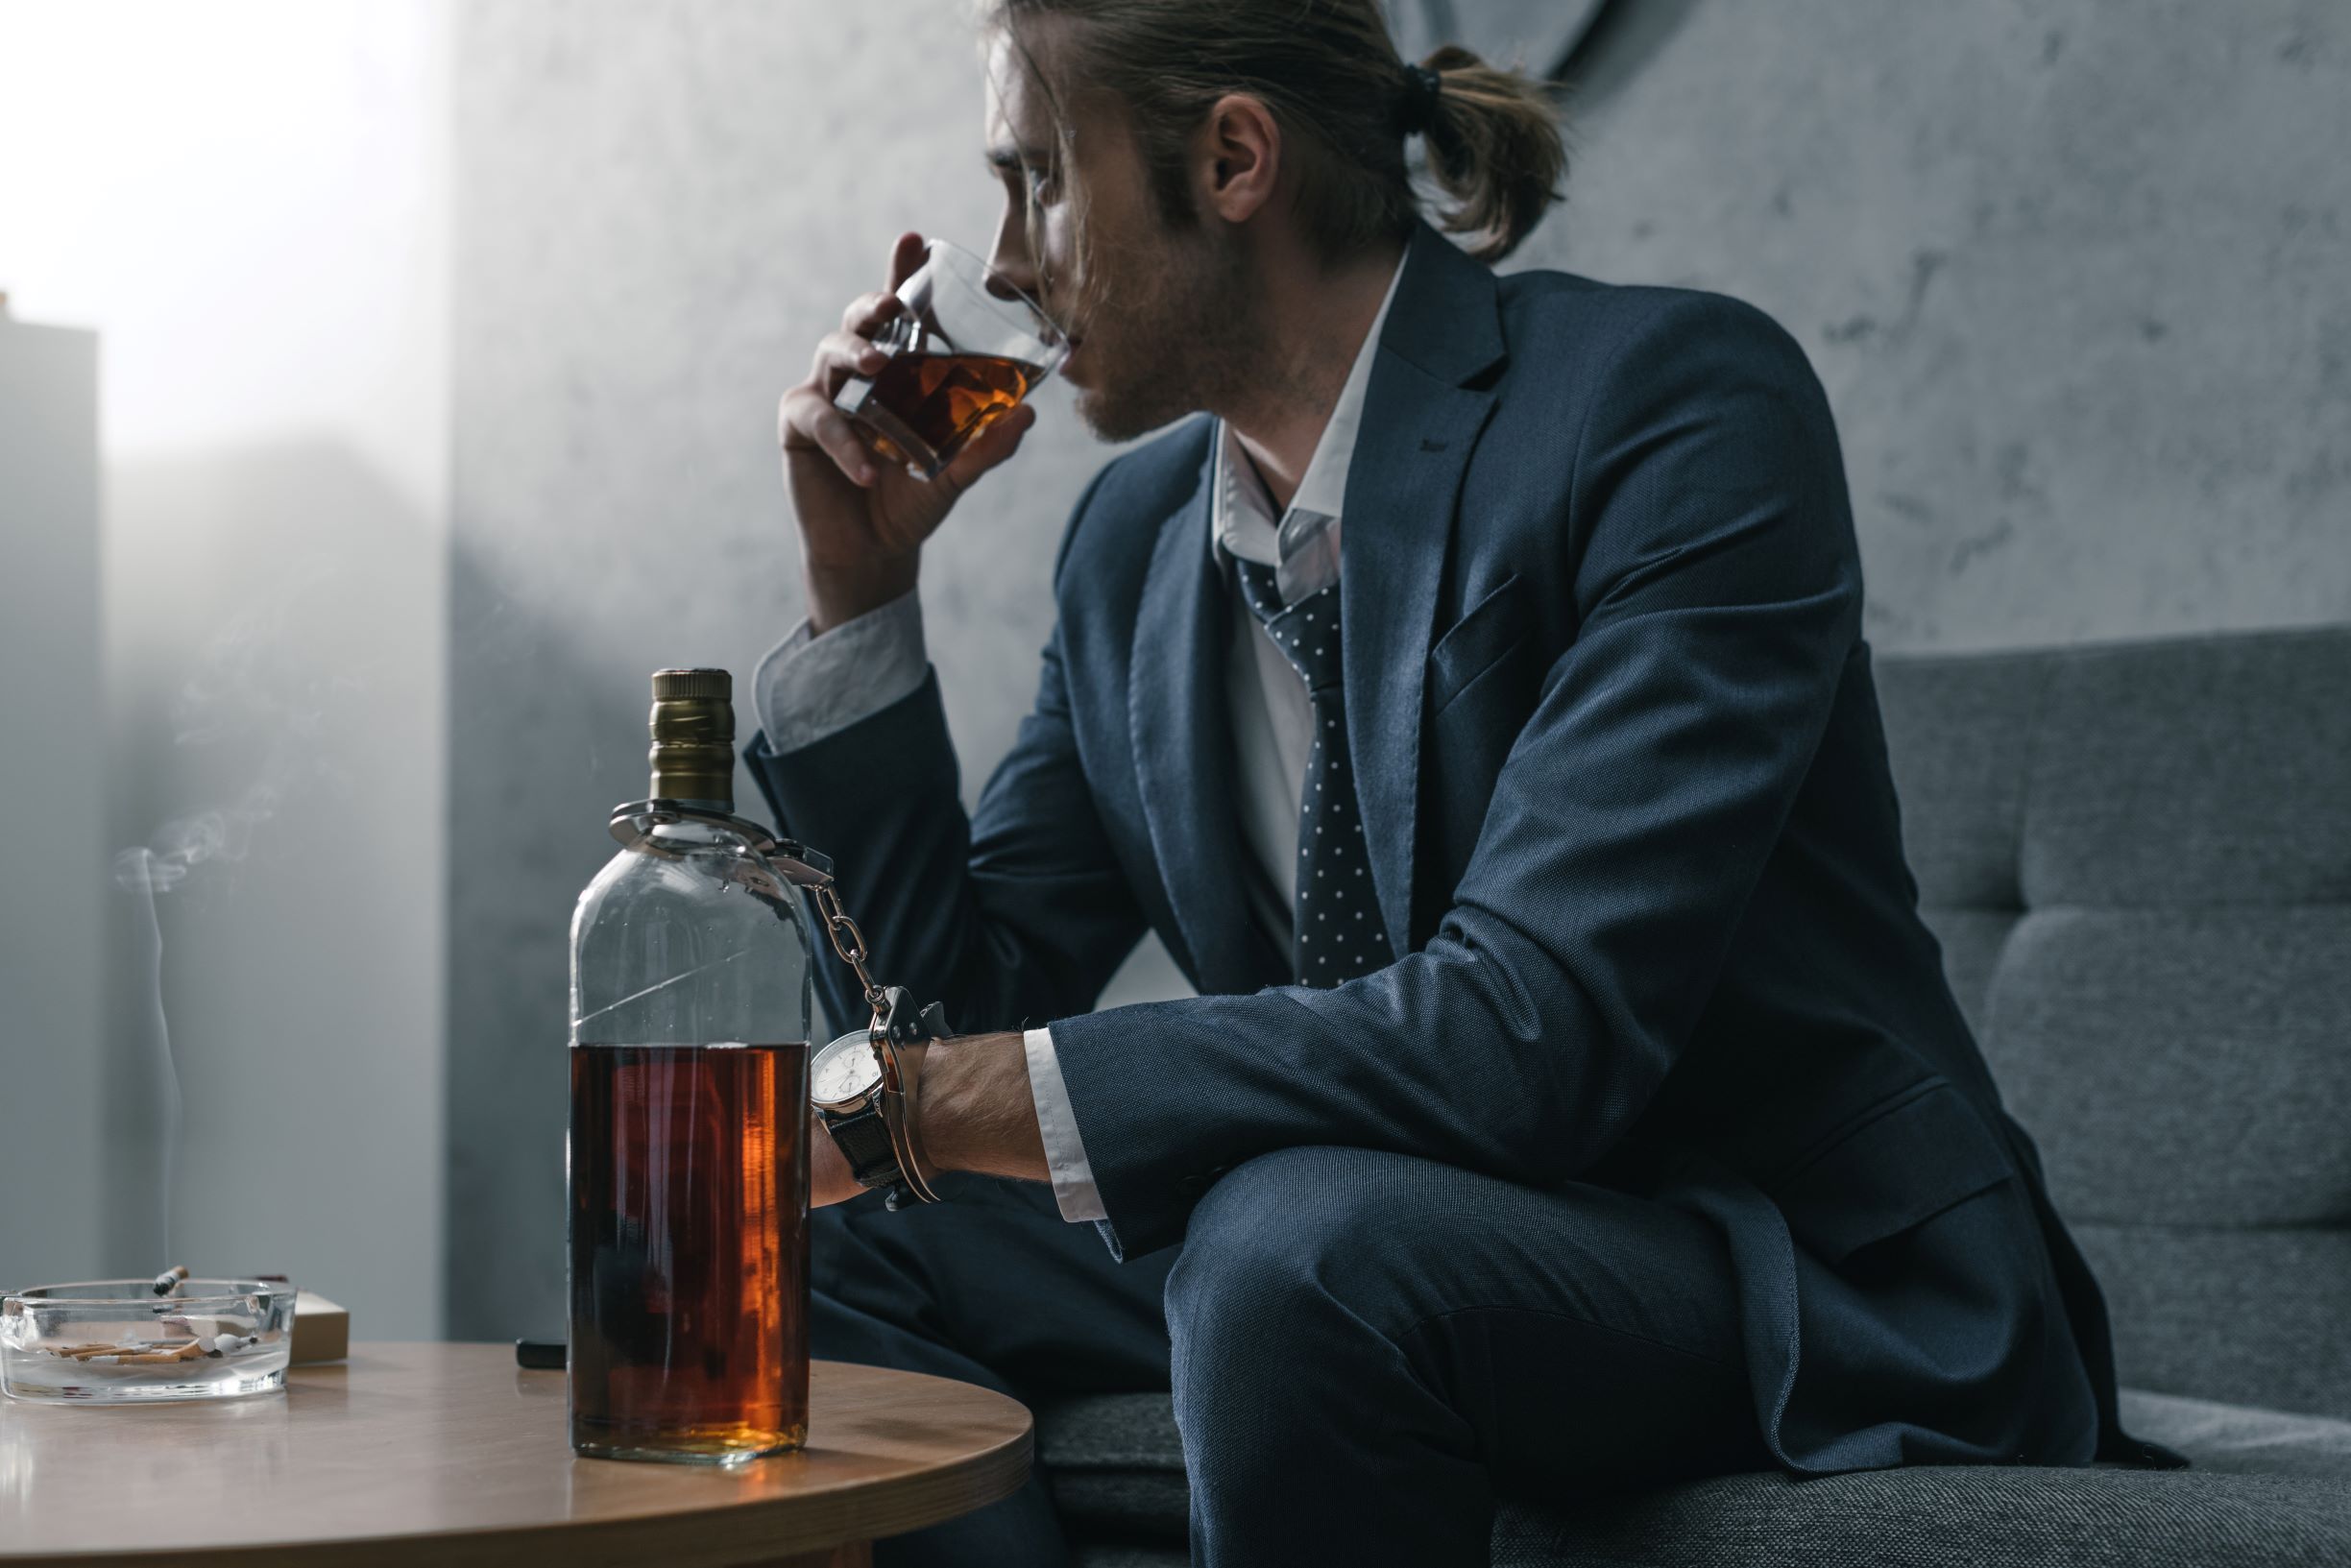 Man suffering from alcohol addiction, sitting and drinking alcohol from a glass. In front of him a big bottle of whiskey.